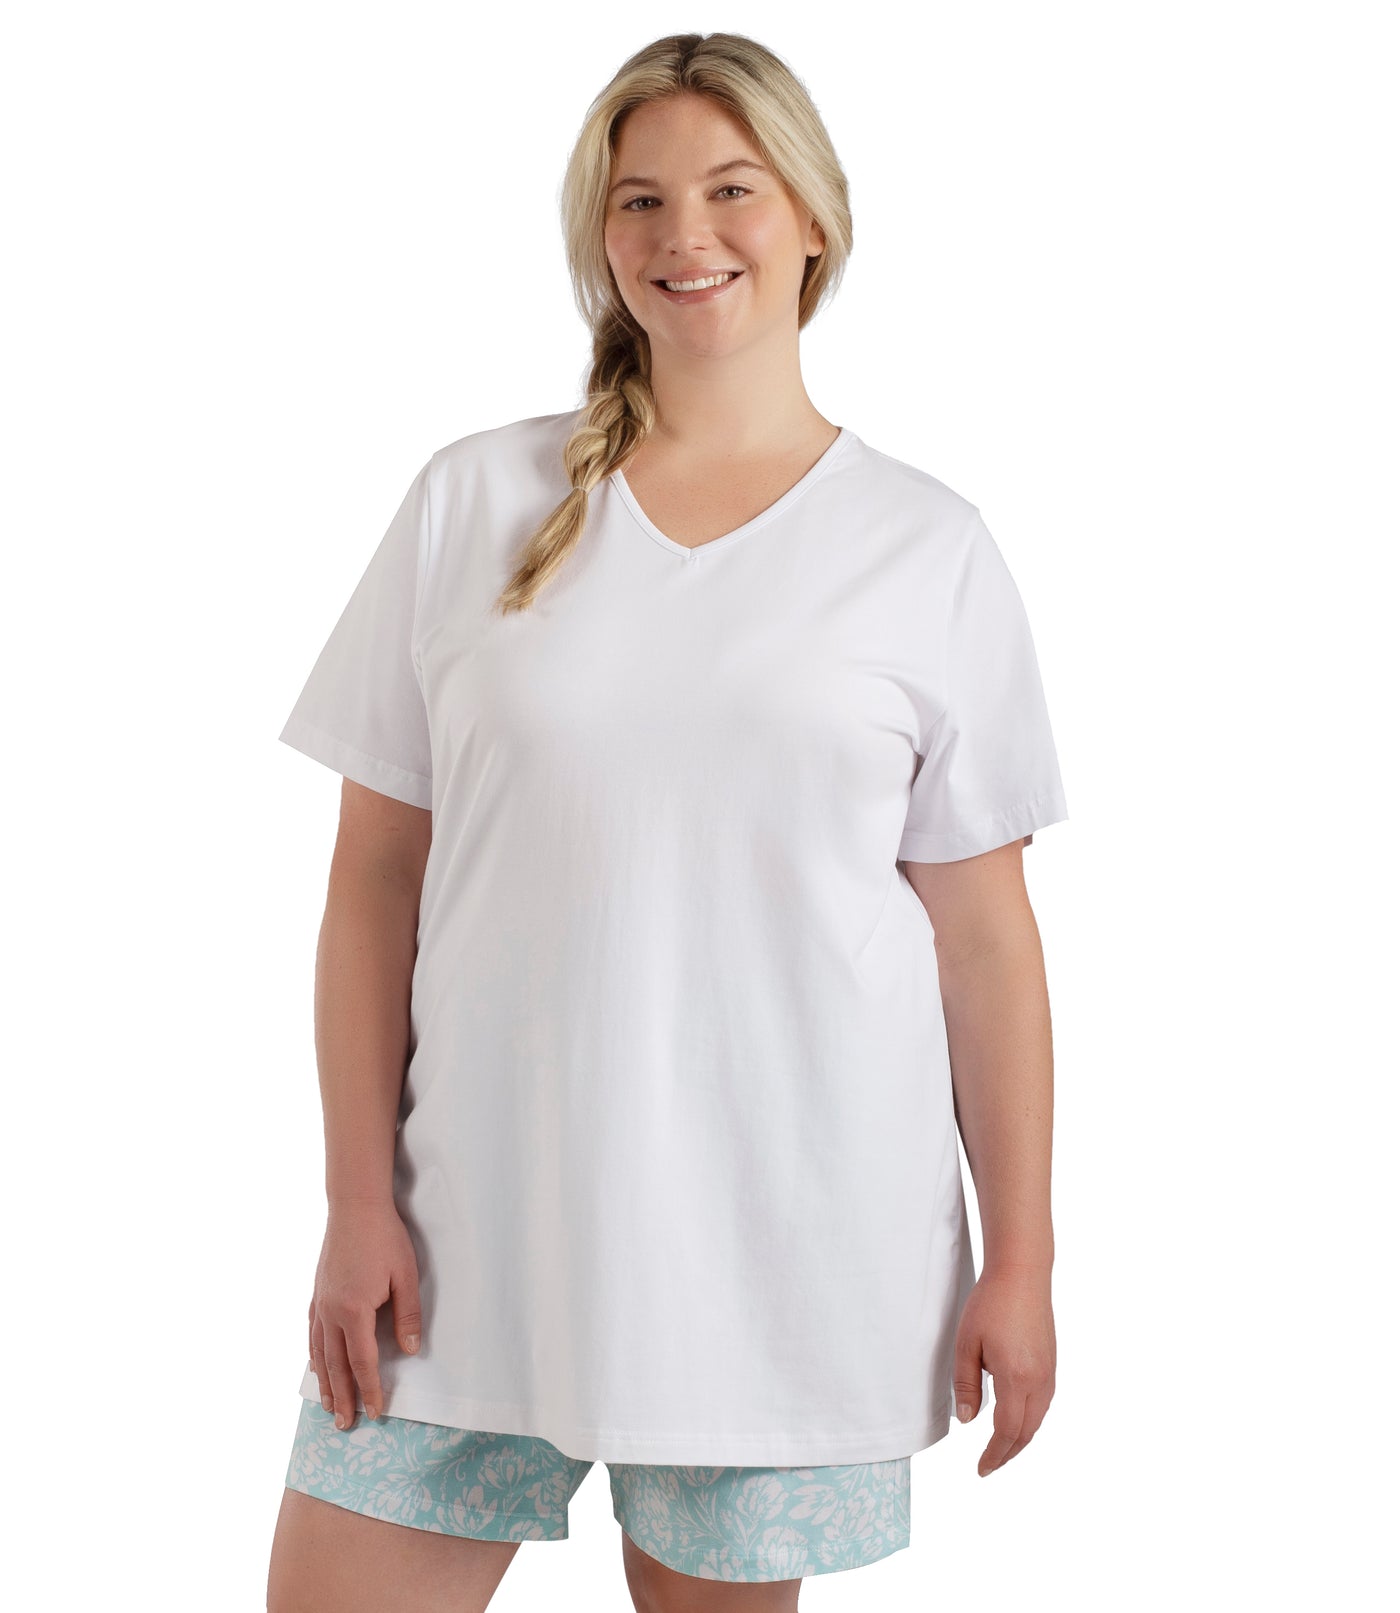 Plus size woman, facing front, wearing JunoBliss V-Neck Short Sleeve Top in color white. Hands down by sides.